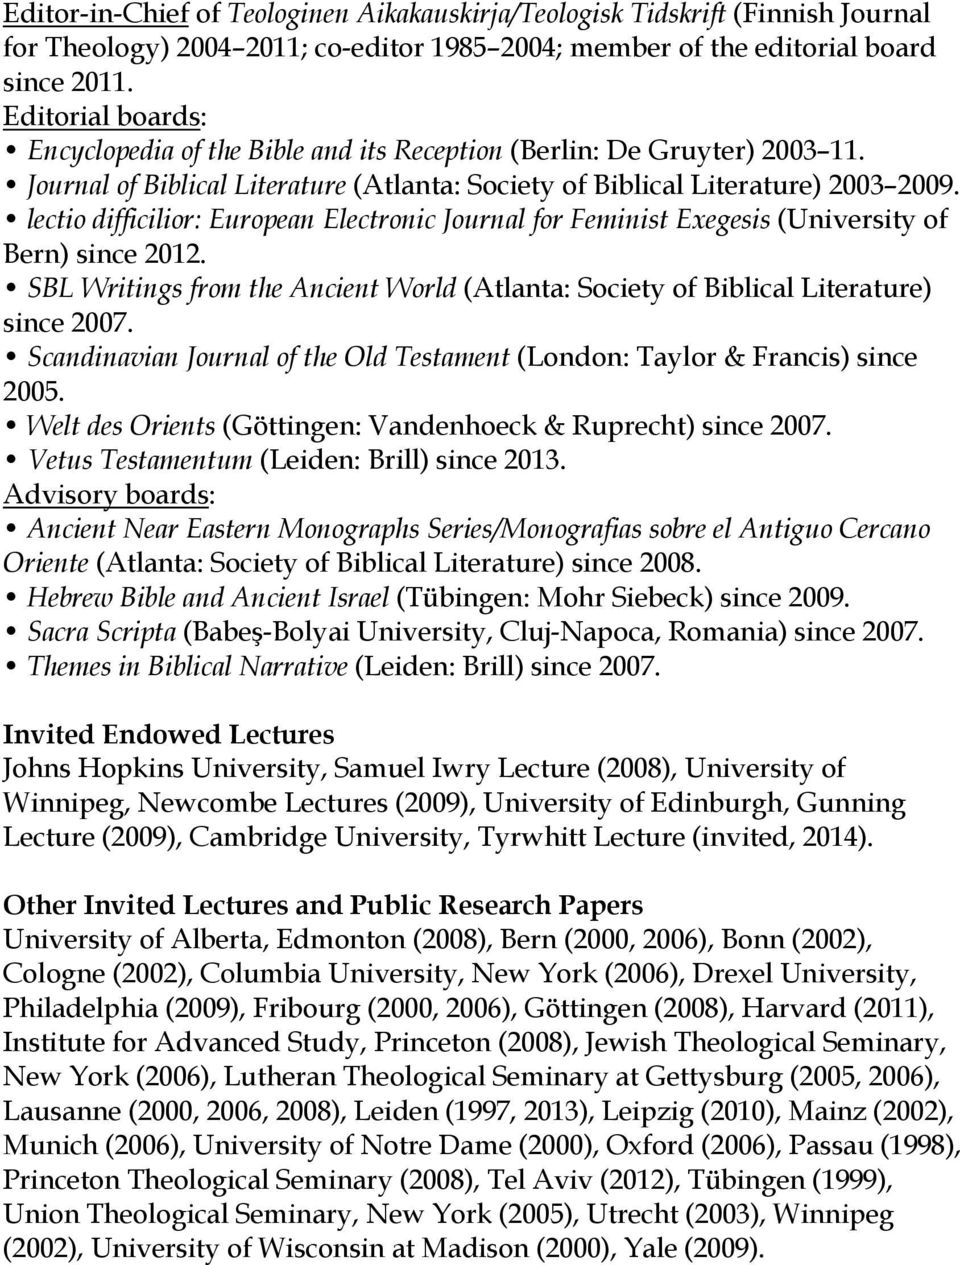 lectio difficilior: European Electronic Journal for Feminist Exegesis (University of Bern) since 2012. SBL Writings from the Ancient World (Atlanta: Society of Biblical Literature) since 2007.